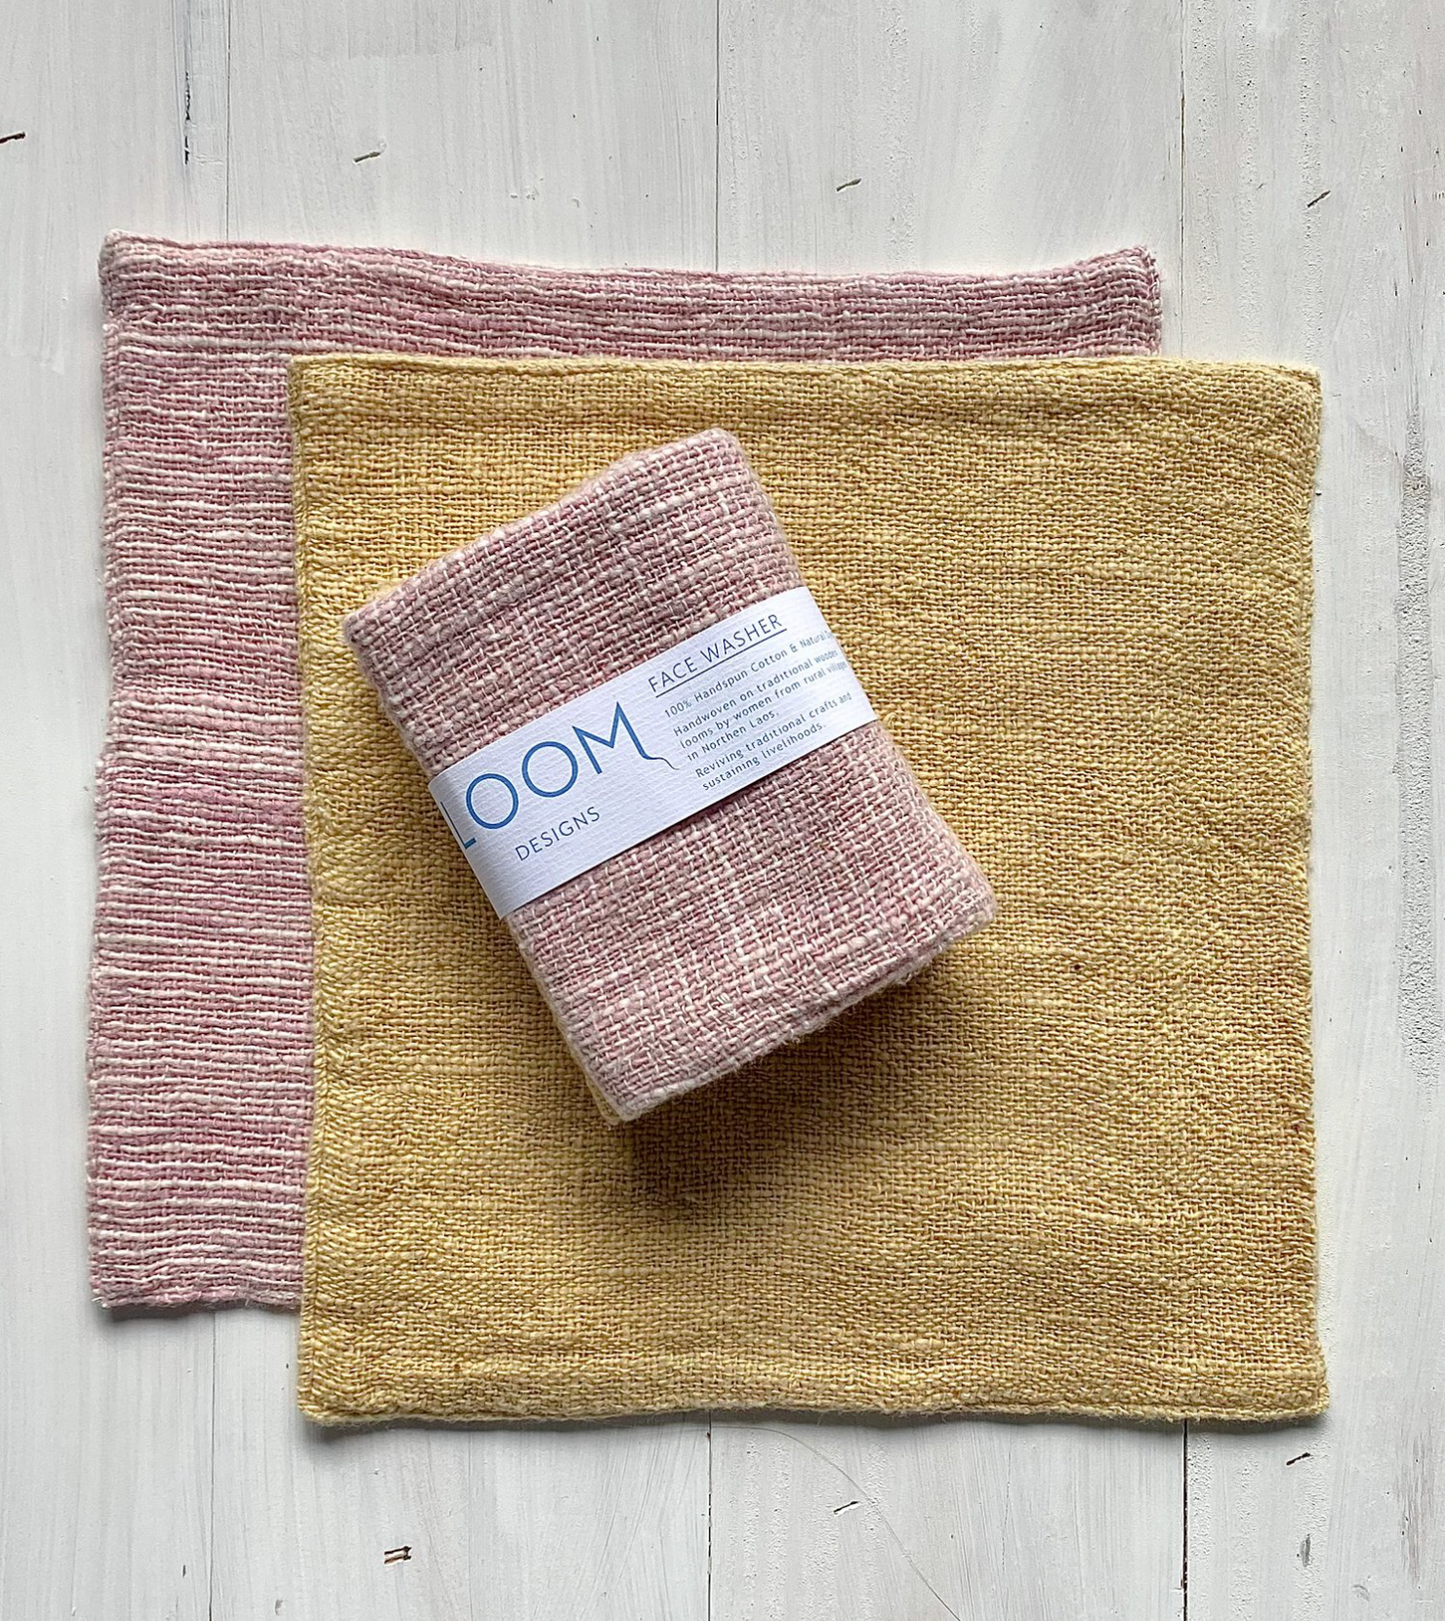 Loom Designs Natural Cotton Face Cloth 2 Pack